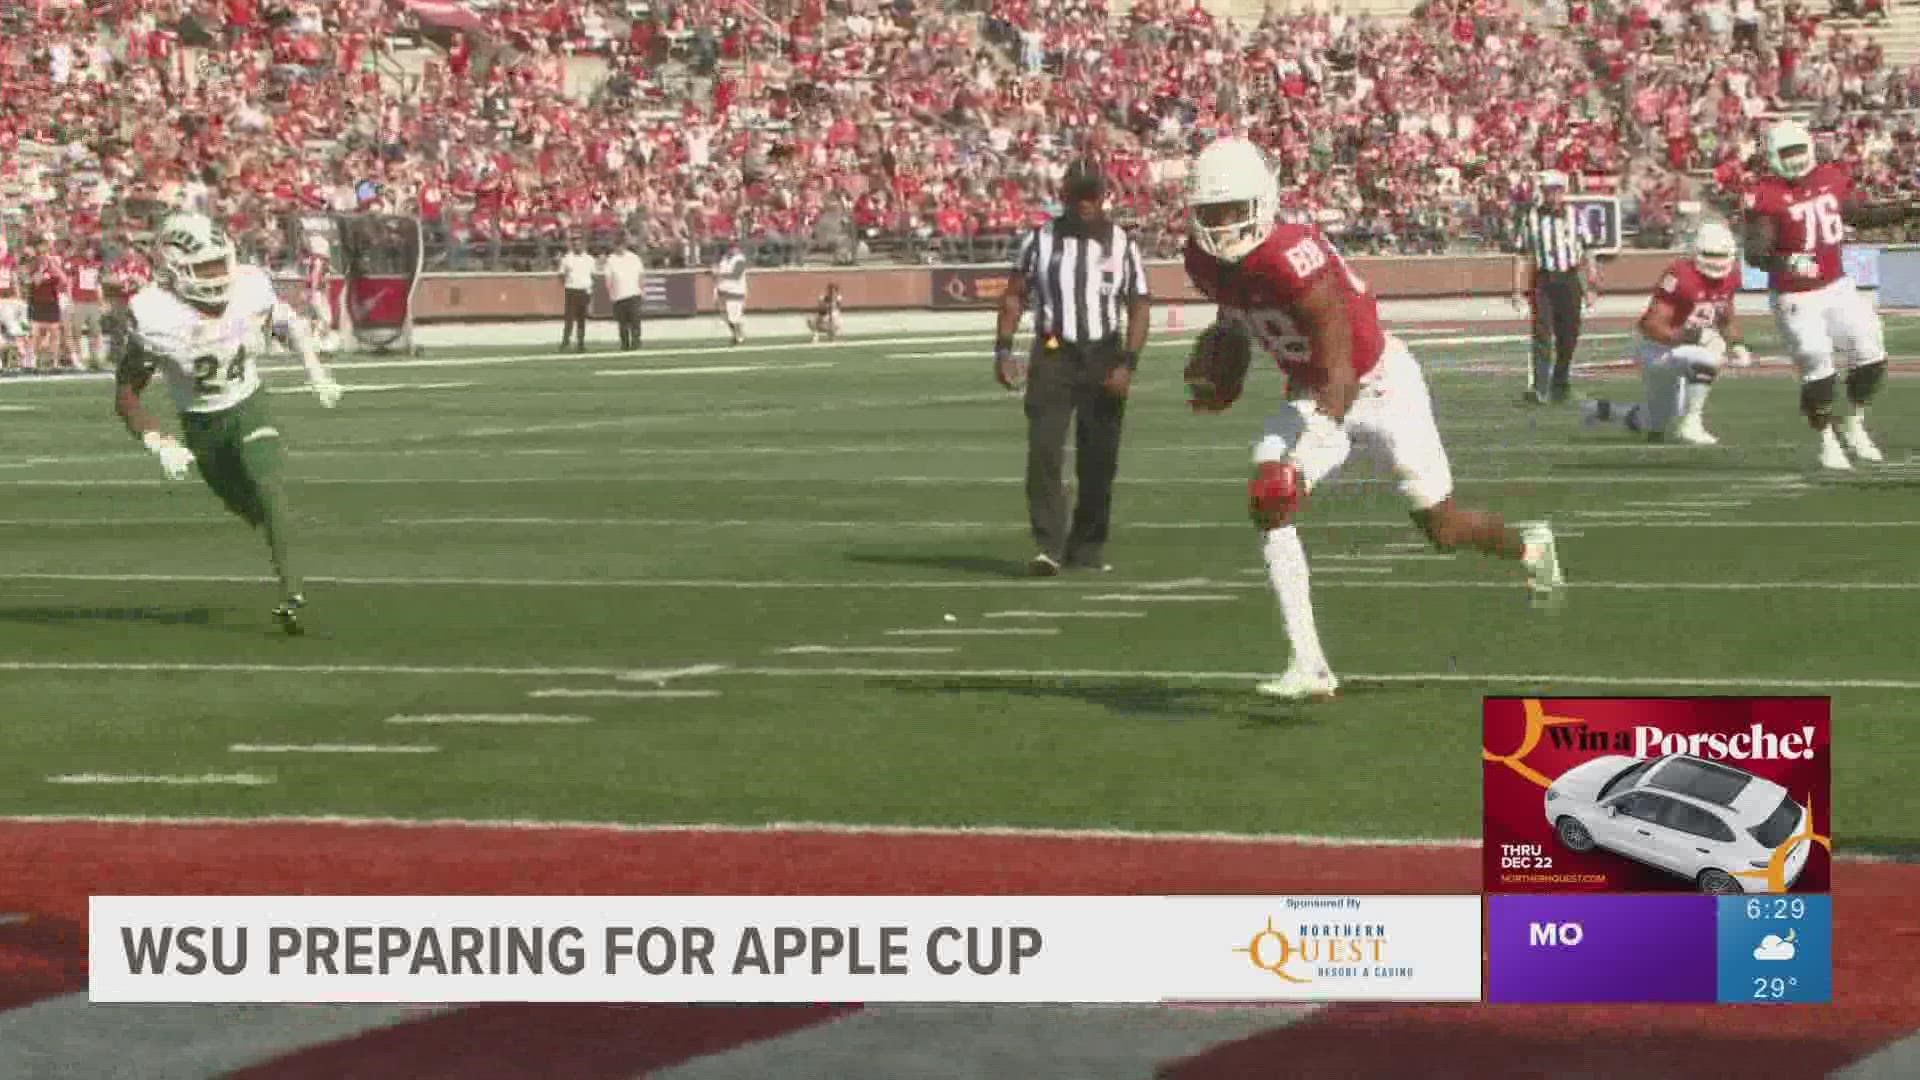 WSU is looking to repeat as victors in this year's Apple Cup matchup against Washington.